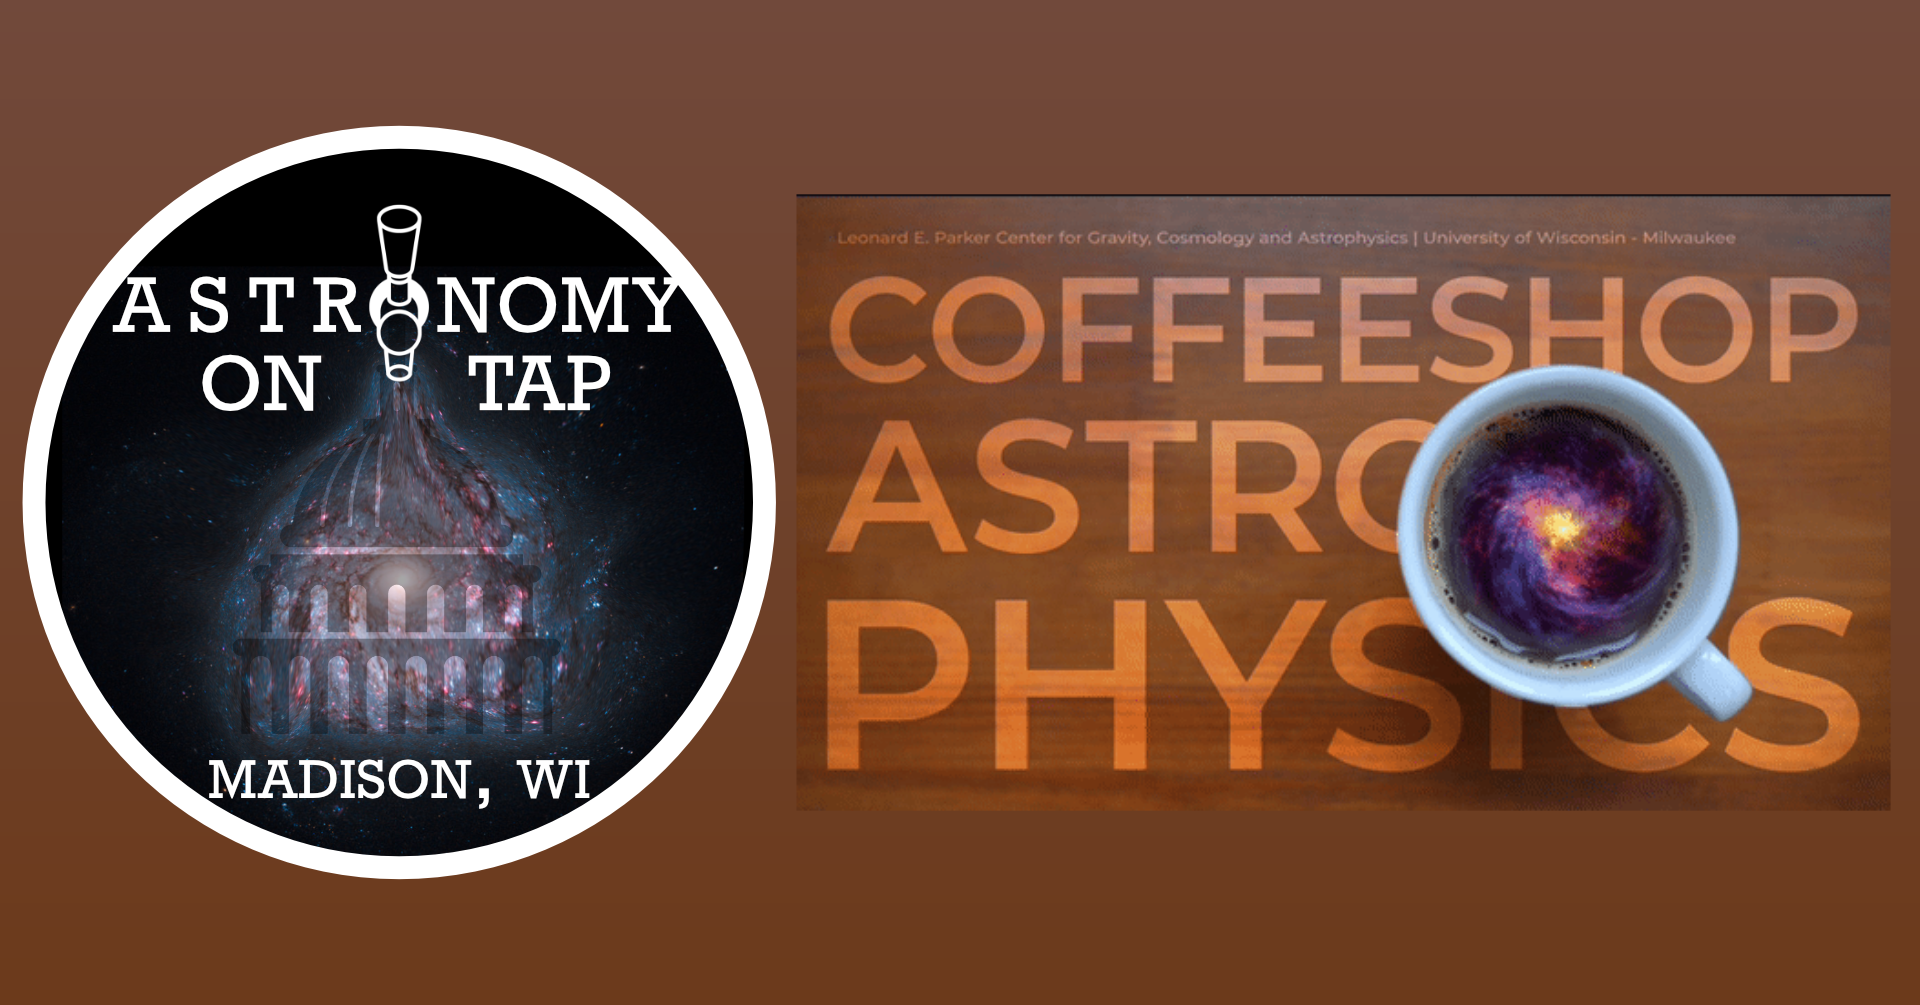 Astronomy on Tap Madison, WI logo on the left featuring a galaxy pouring from a tap handle with the Coffeeshop Astrophysics logo featuring a swirling galaxy as viewed from top-down on a wooden table on right.